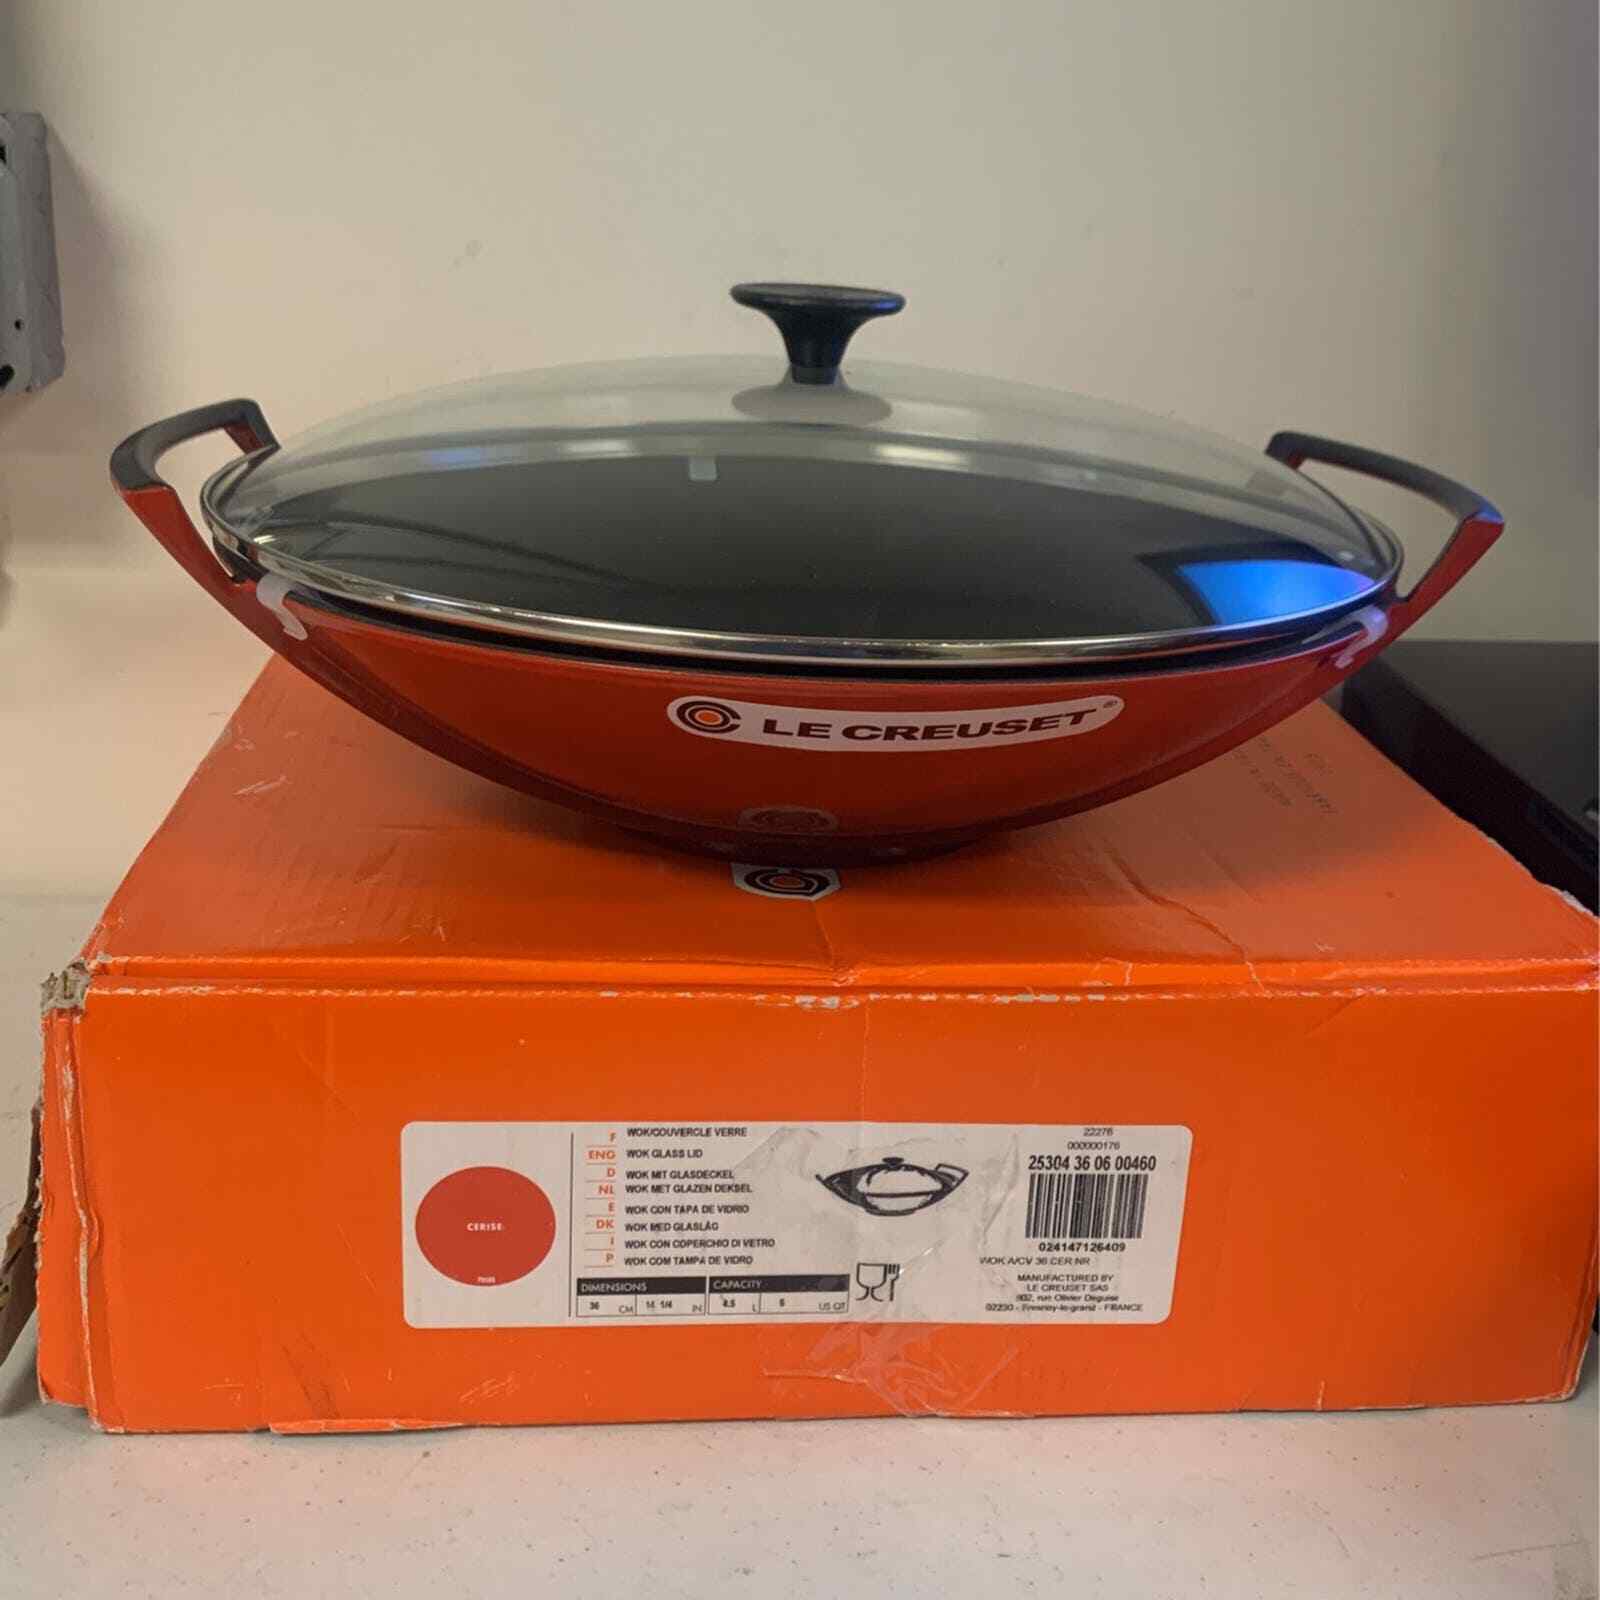 Le Creuset Wok with Glass Lid - DEFECTIVE (SMALL DENT) - Cherry